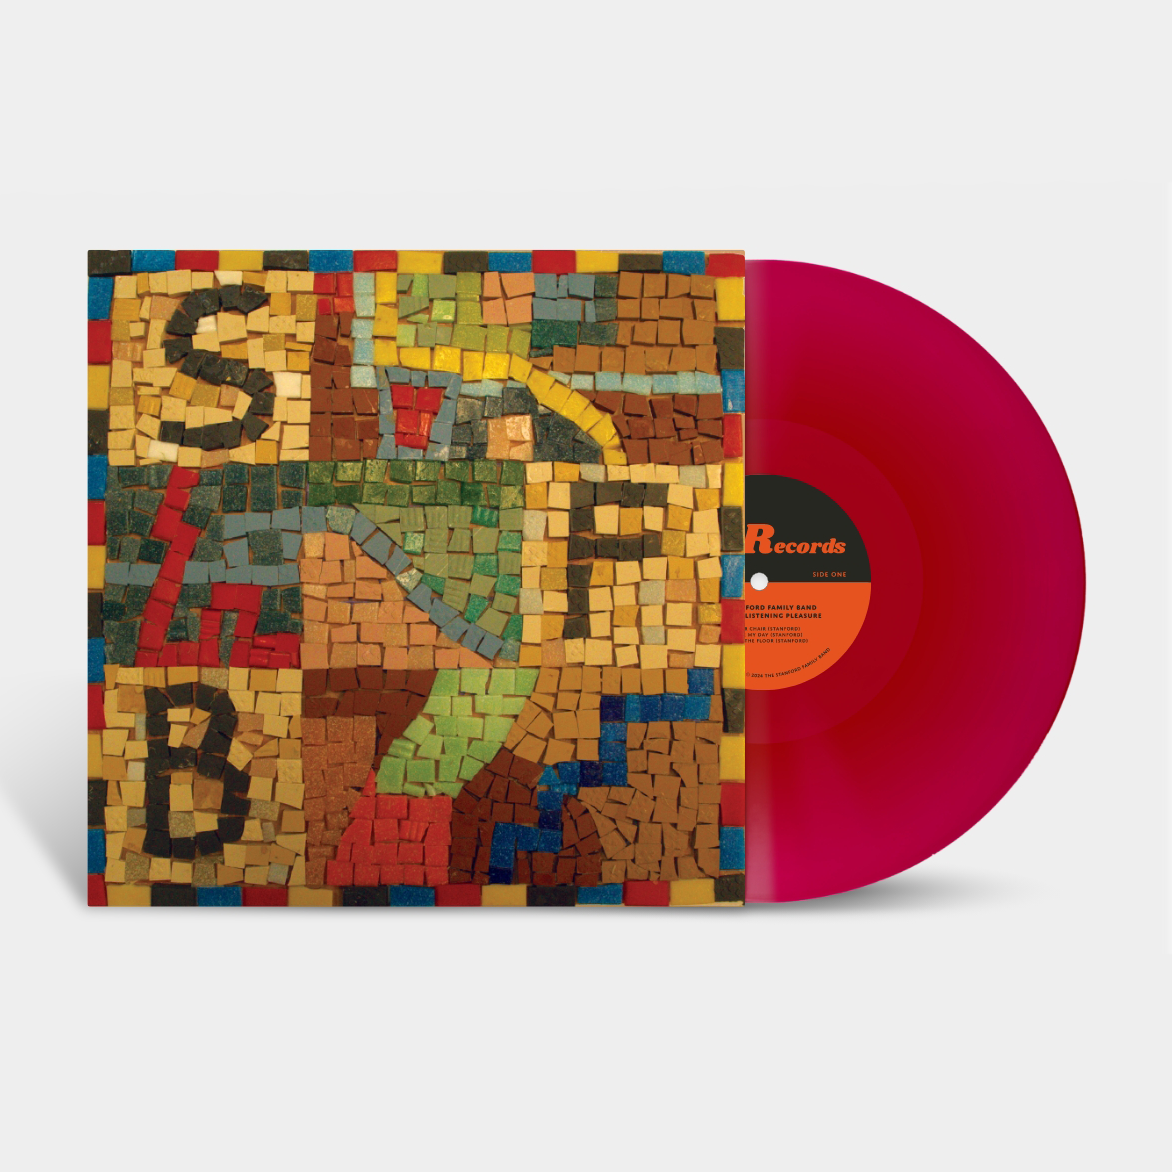 The Stanford Family Band - For Your Listening Pleasure: Limited Opaque Red Vinyl 12" EP